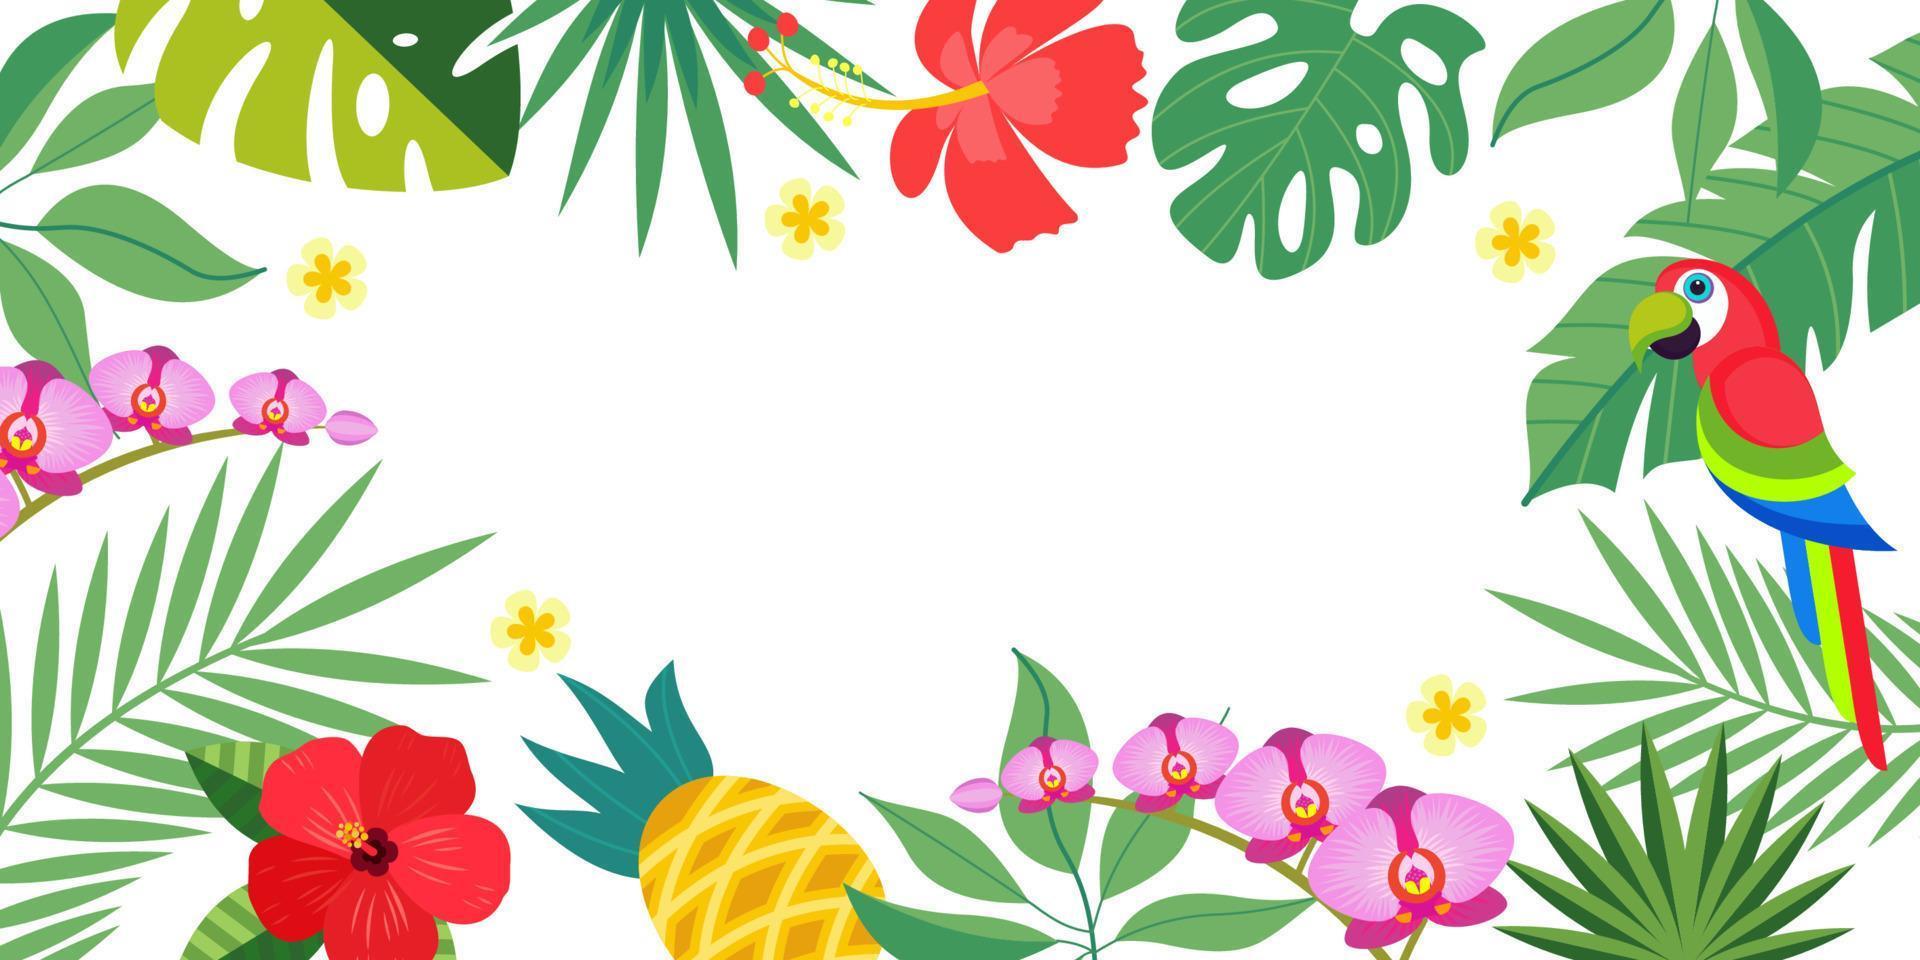 Bright tropical background with tropical palm leaves, parrot and flowers. Vector illustration with an empty space for text.